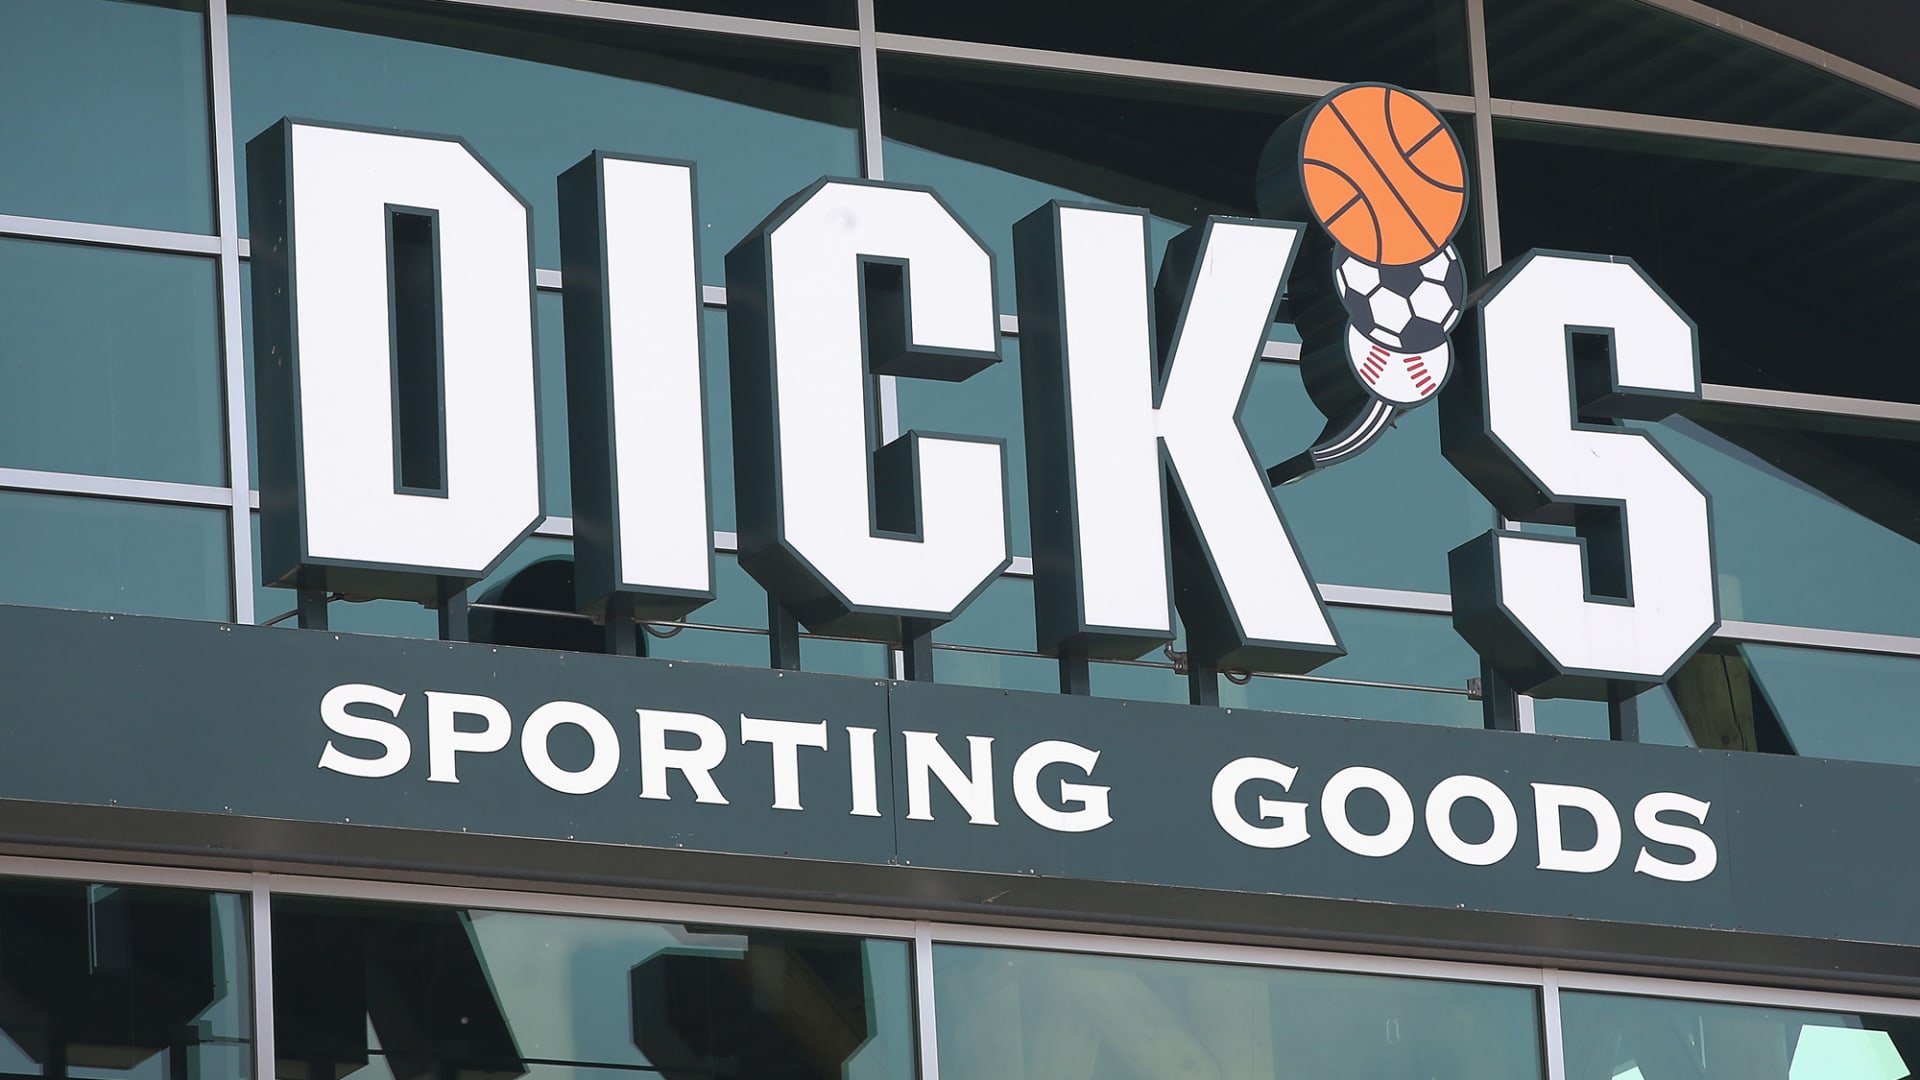 Stocks making the biggest moves noon: Dick’s Sporting Goods, Macy’s, Charles Schwab and more